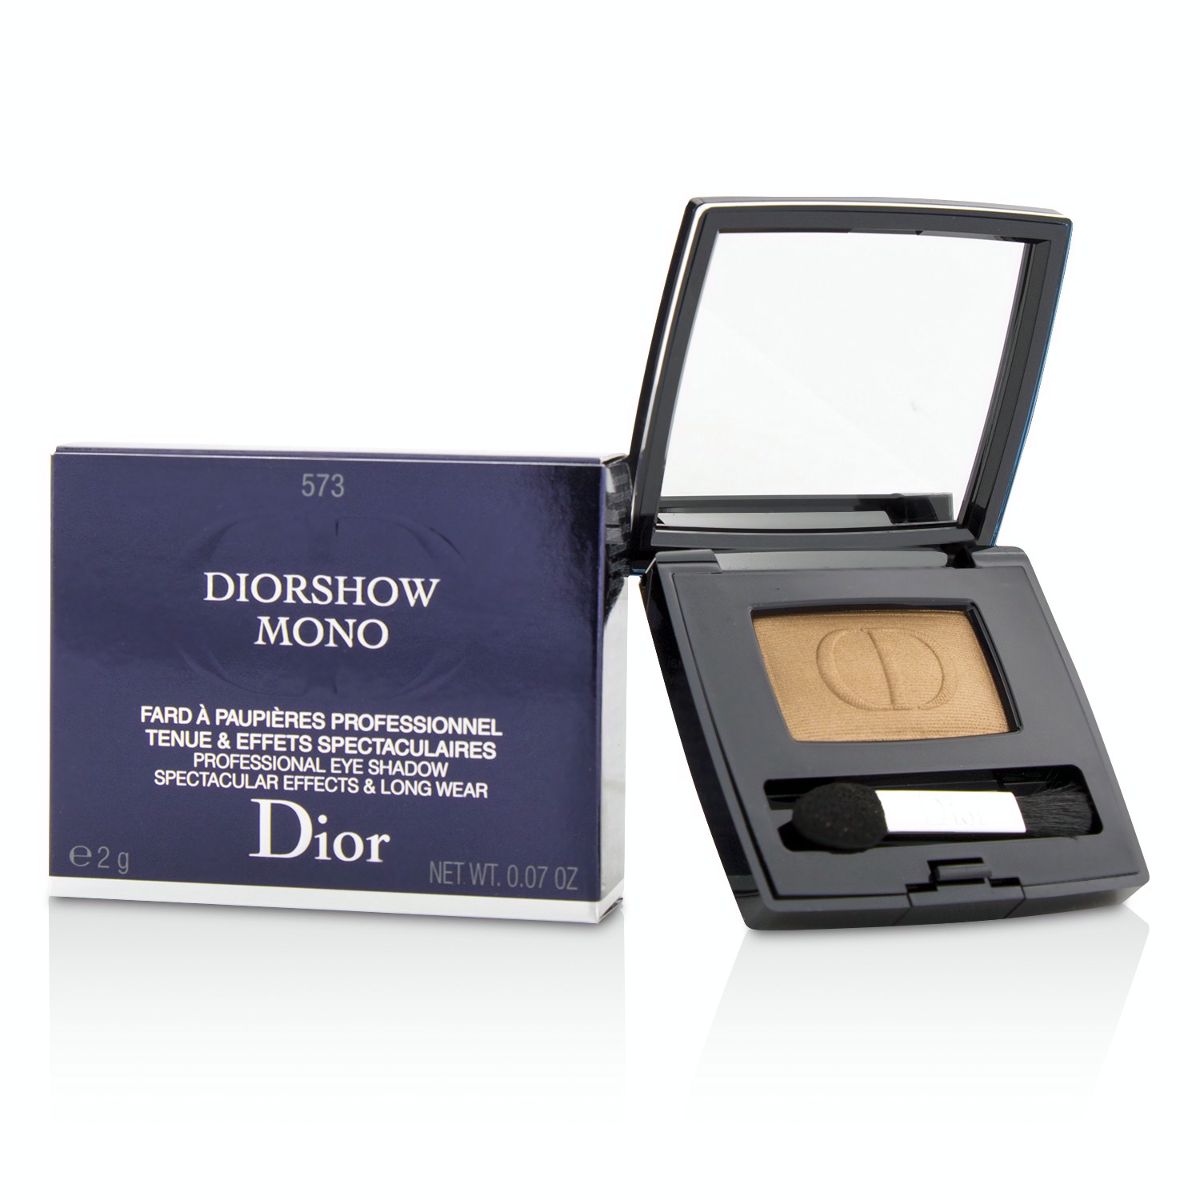 Diorshow Mono Professional Spectacular Effects  Long Wear Eyeshadow - # 573 Mineral Christian Dior Image